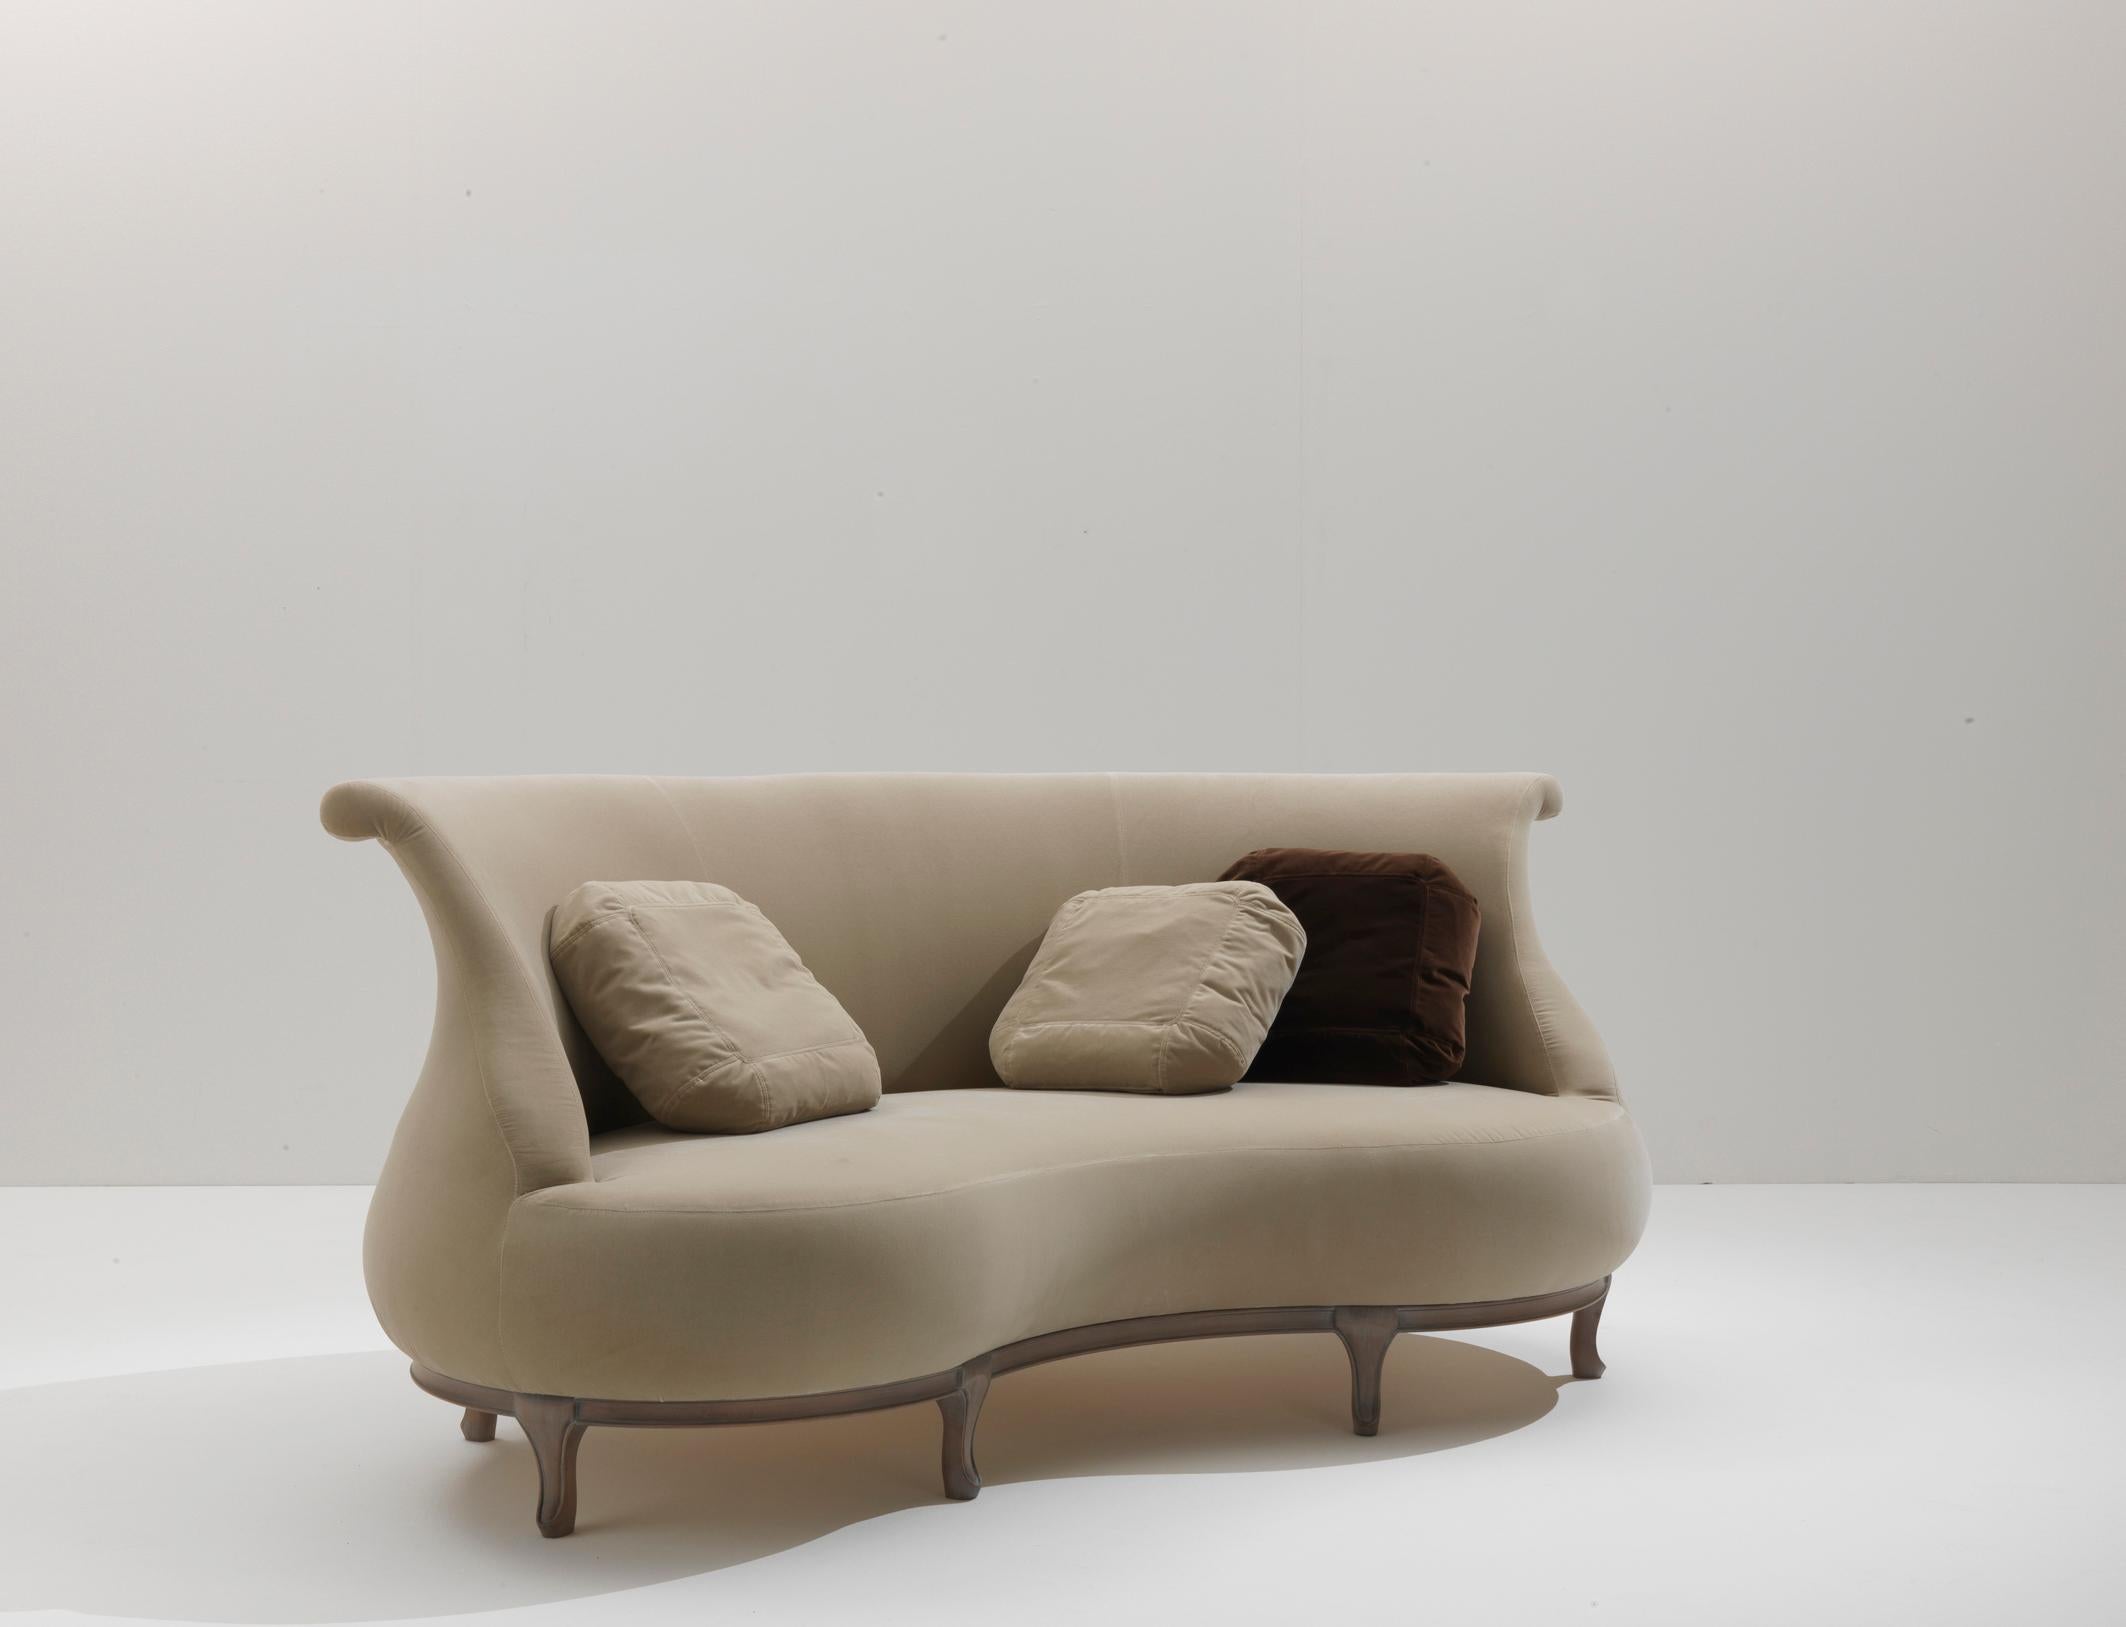 The Plump sofa, a creation by the renowned Nigel Coates, invites you into a world of anthropomorphic elegance and rounded perfection. Its design boasts a soft and comfortable seat that beckons relaxation.

This unique sofa is defined by its